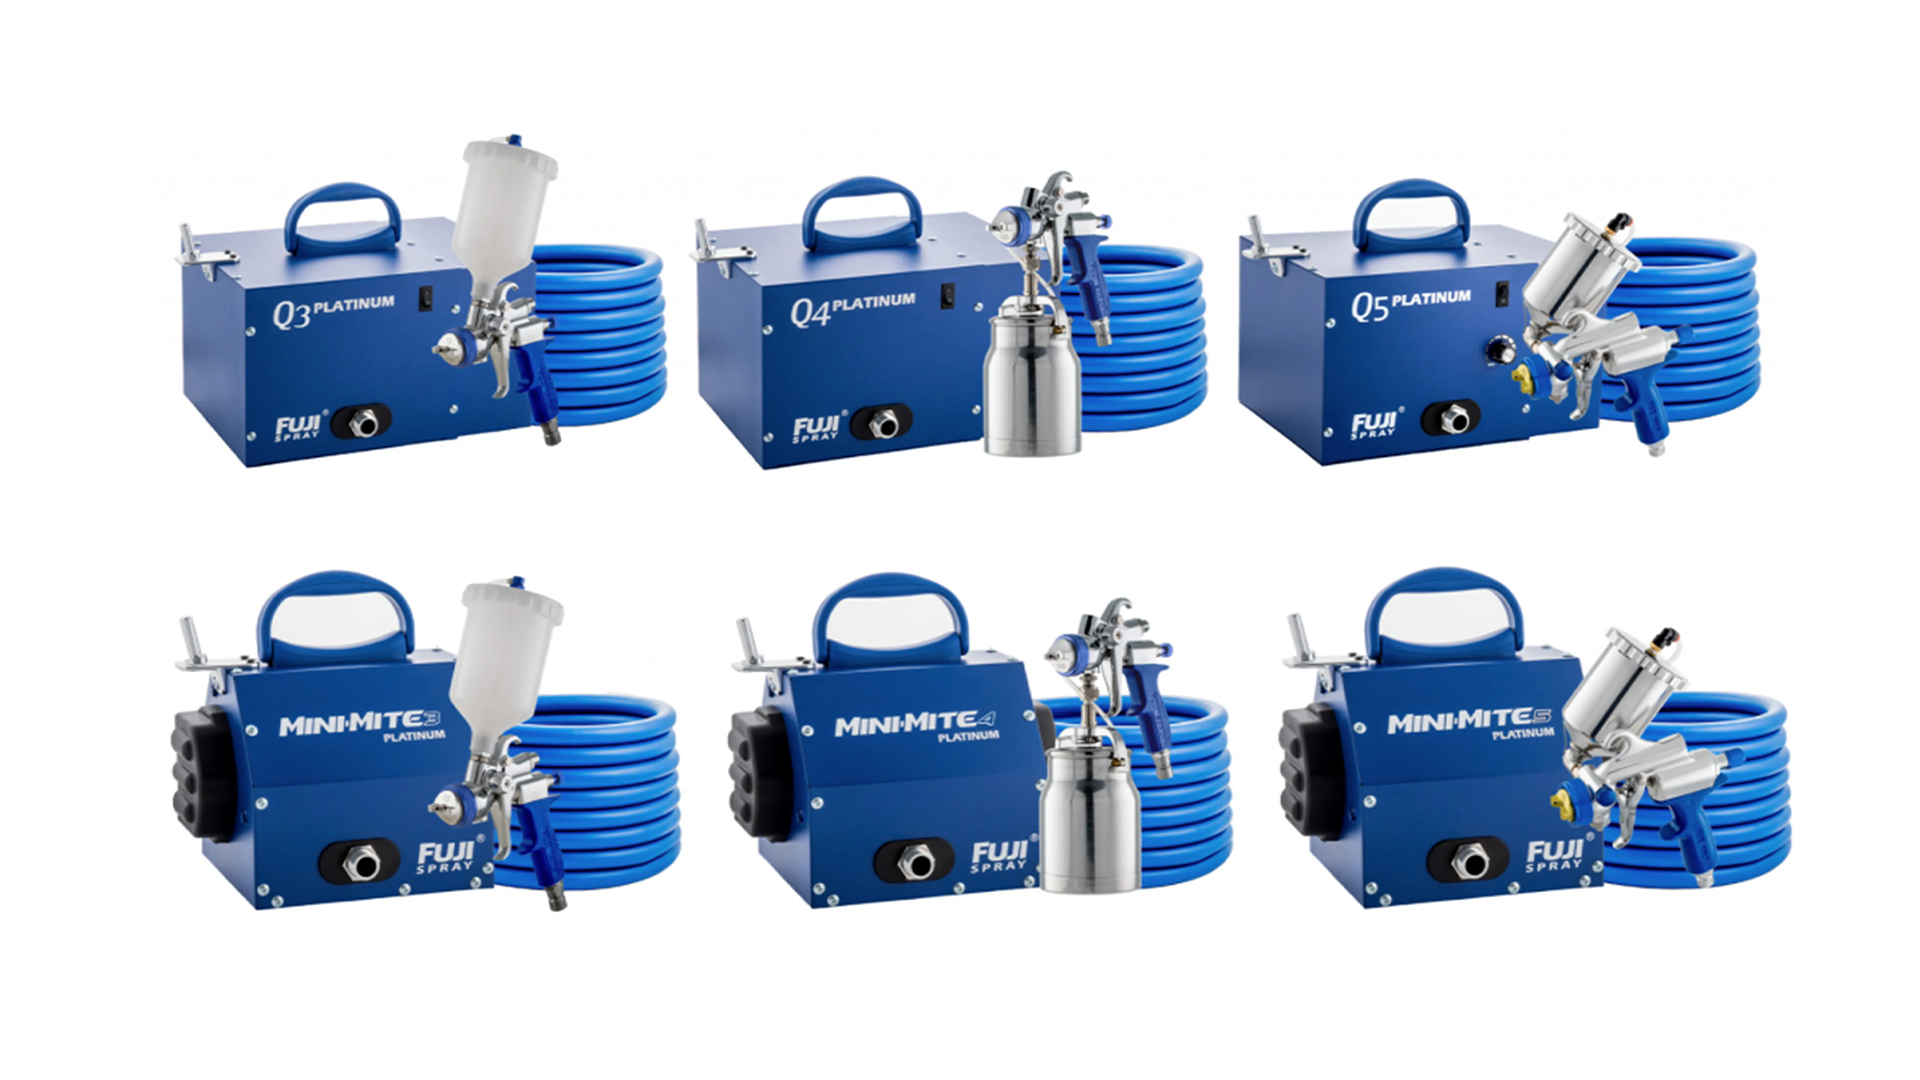 Different Fuji Spray Systems